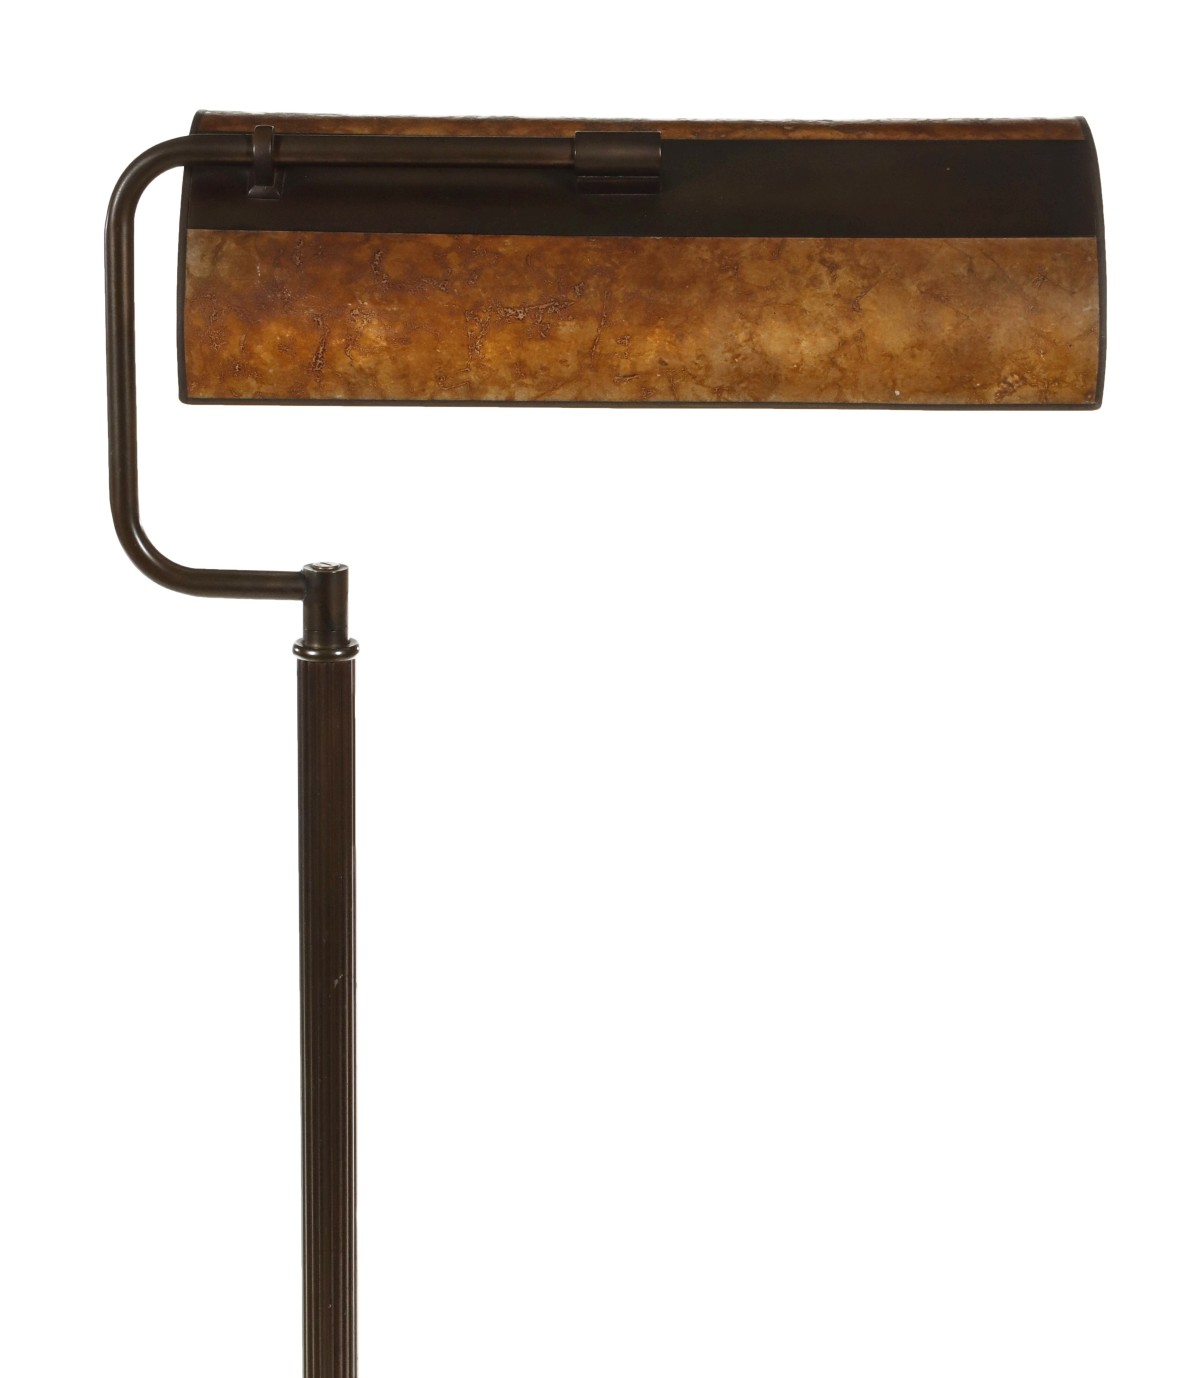 AN EARLY 20TH CENTURY FLOOR LAMP WITH LATER MICA SHADE